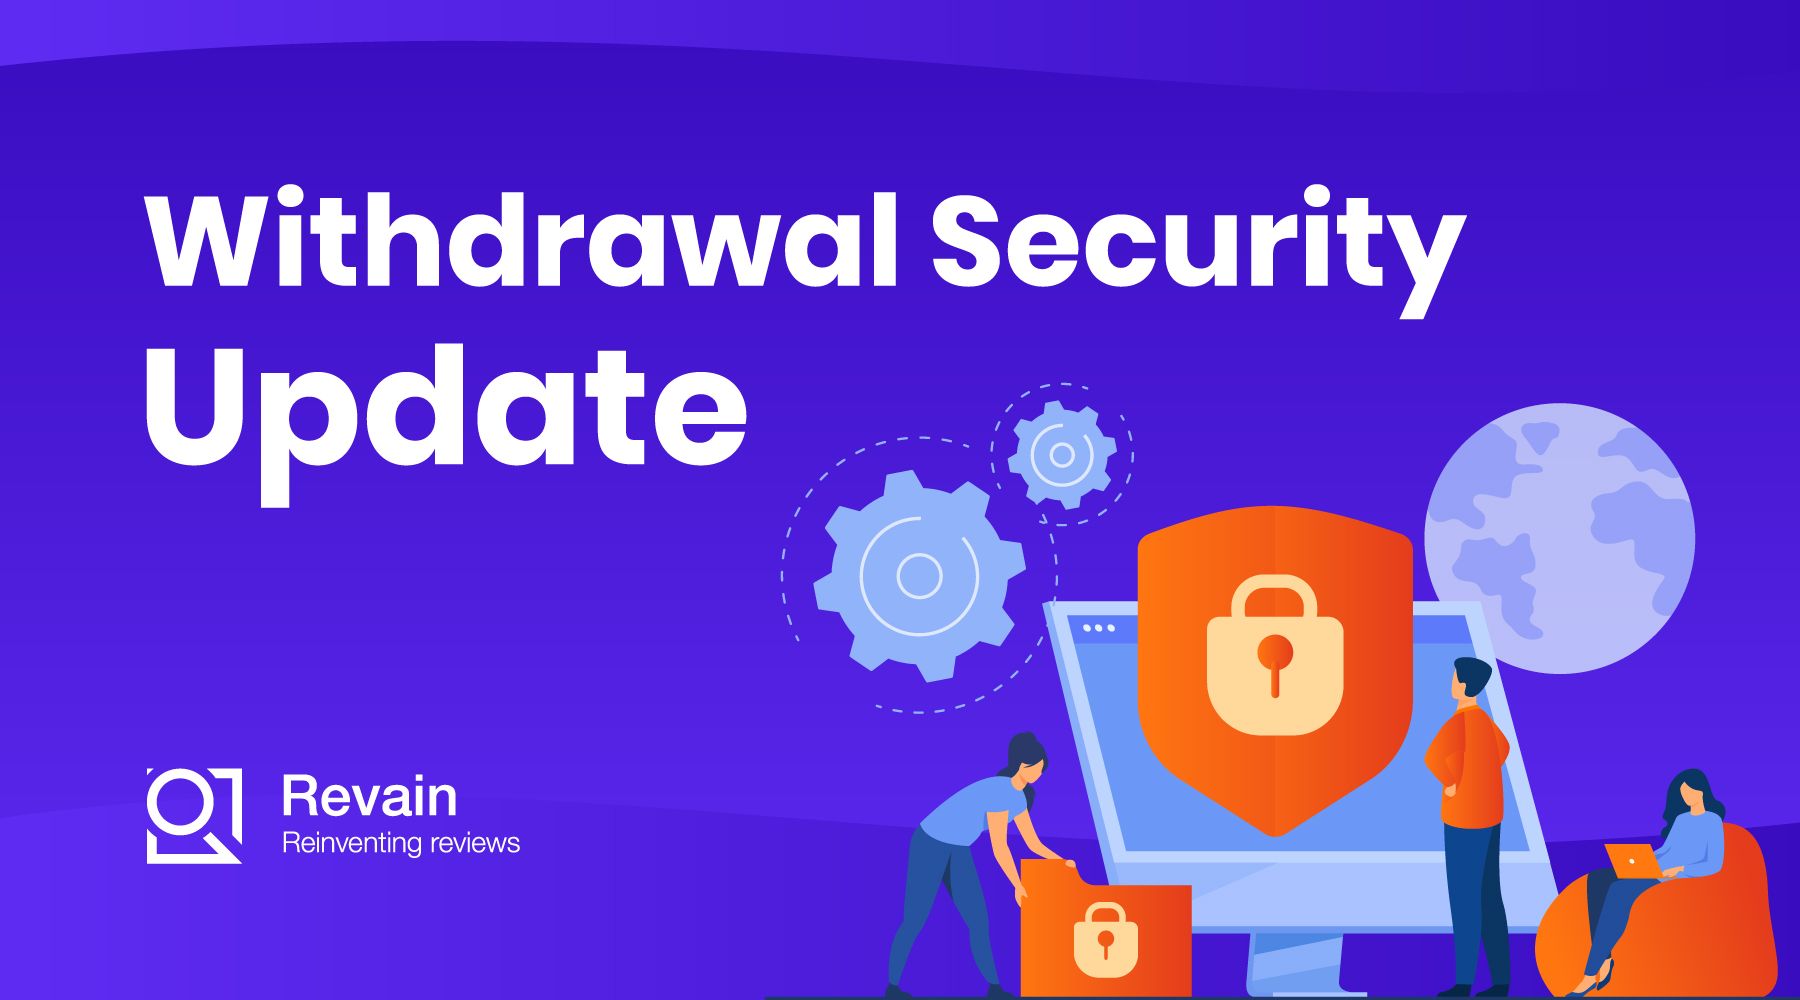 Withdrawal Security Update